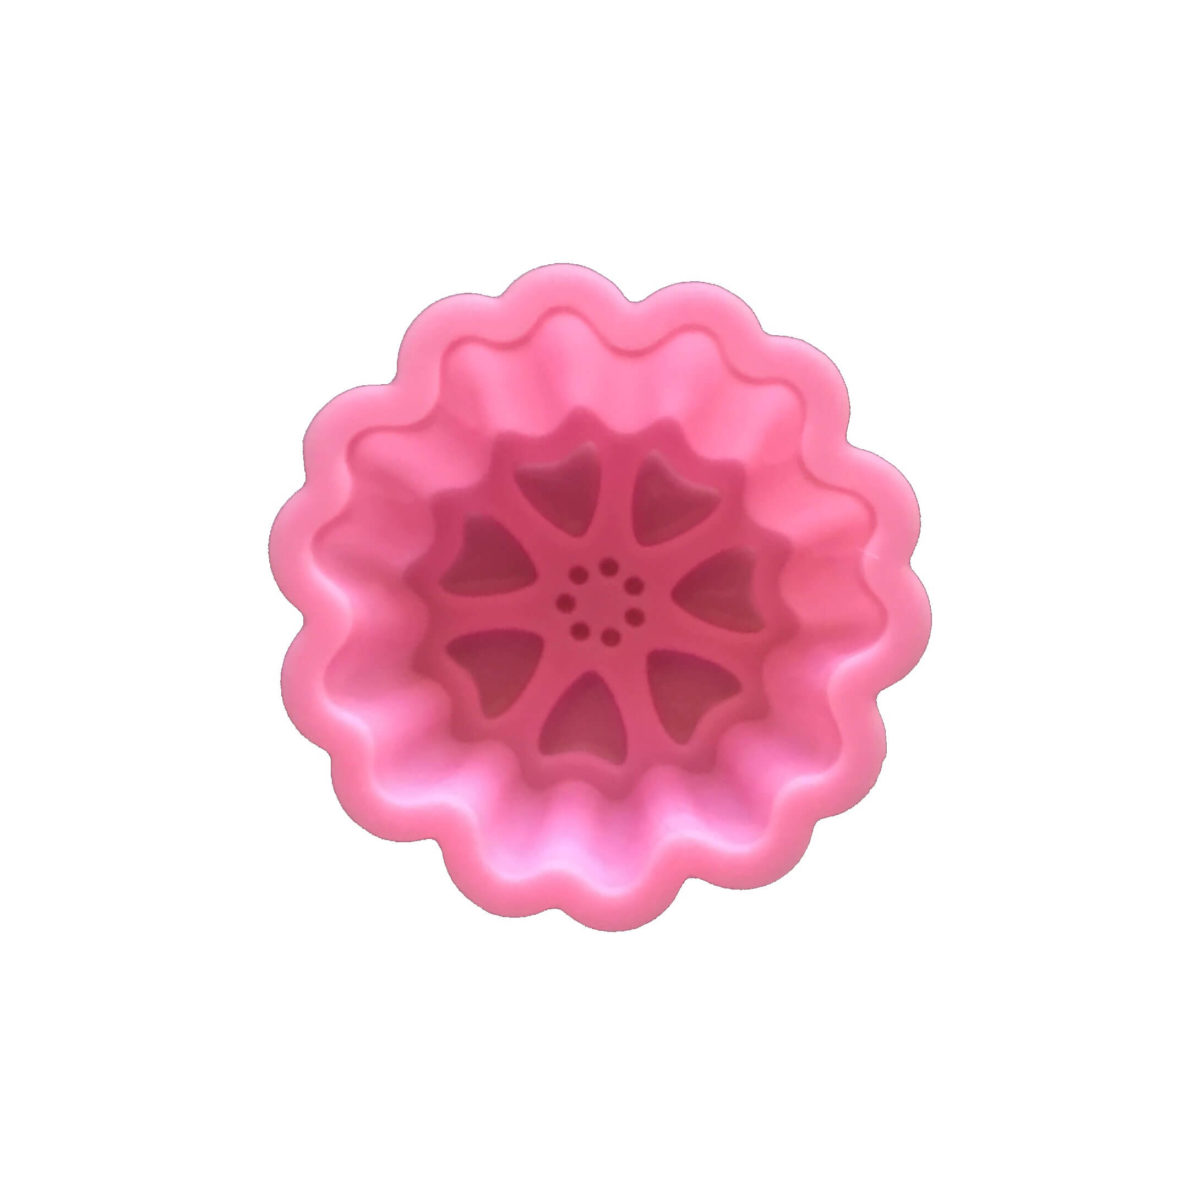 back of 5cm pink heart blossom single cavity silicone mould